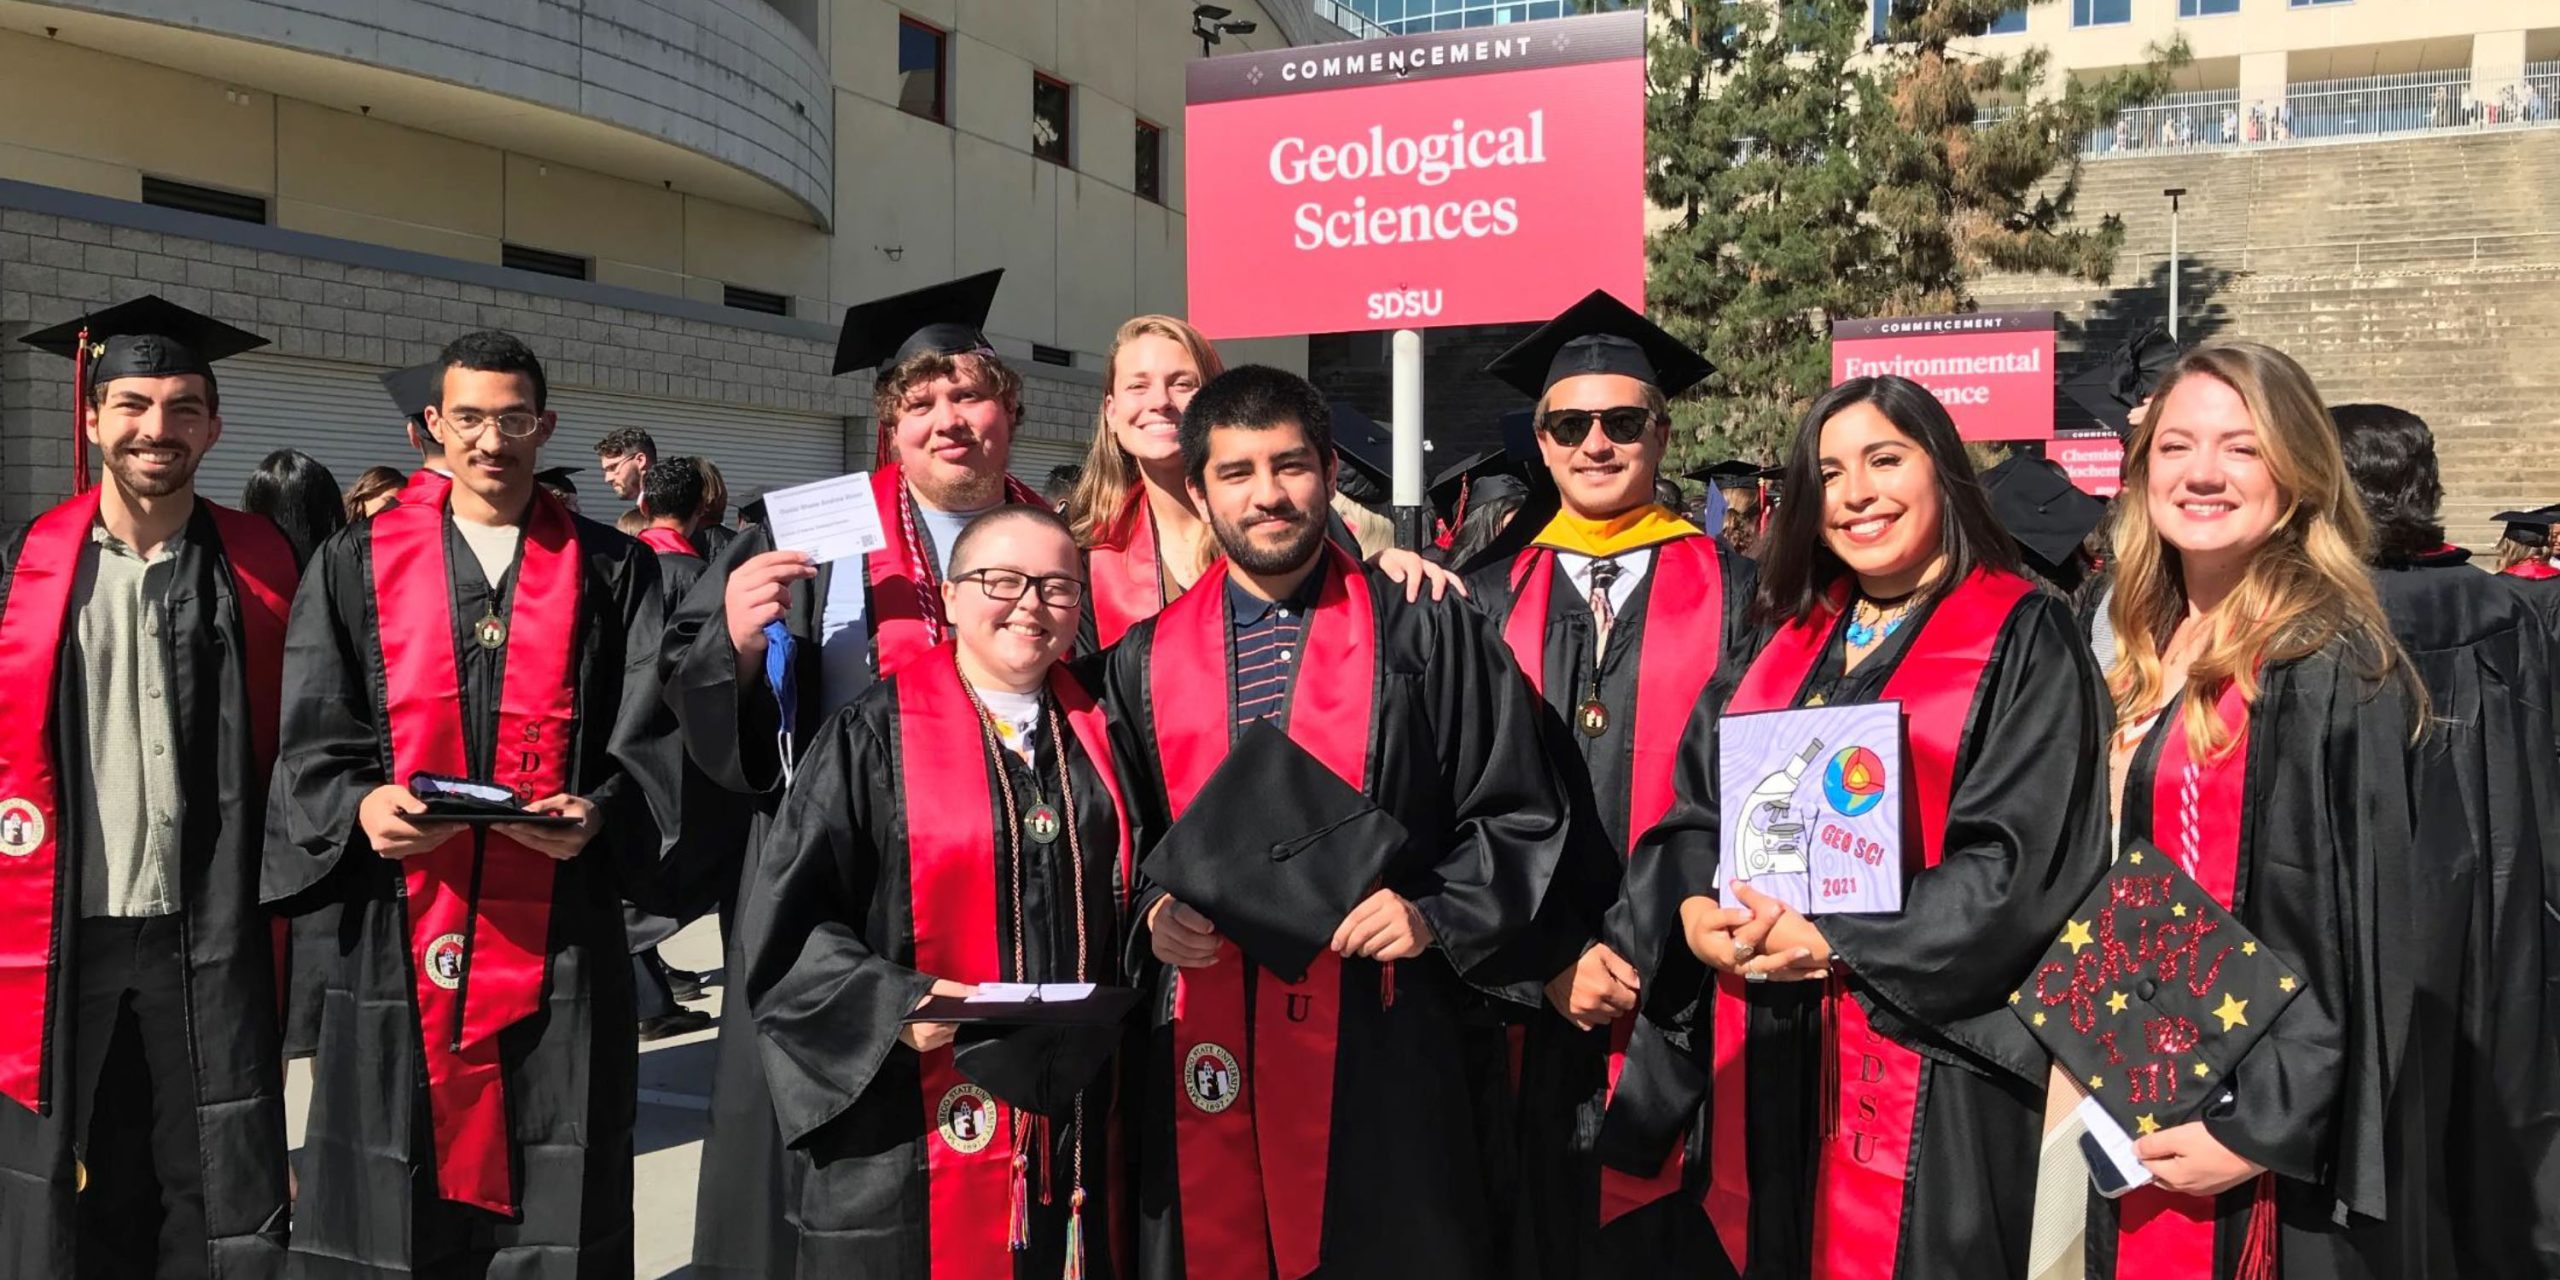 Undergraduates and graduates wearing graduation regalia gathered together in front of the Geological Sciences sign